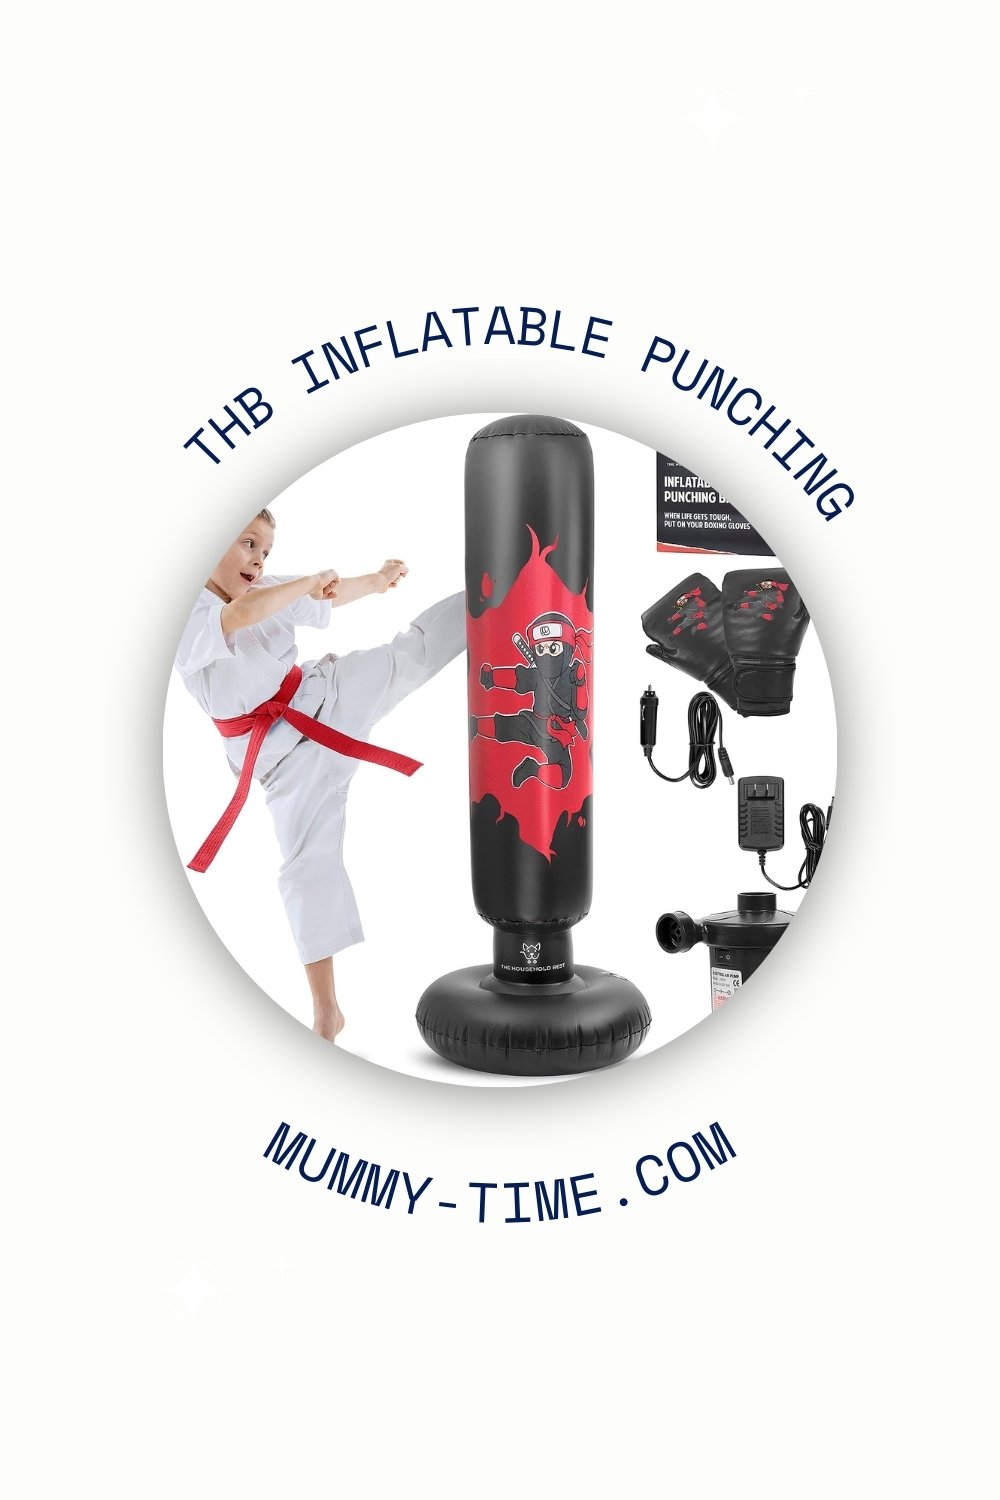 THB Inflatable Punching